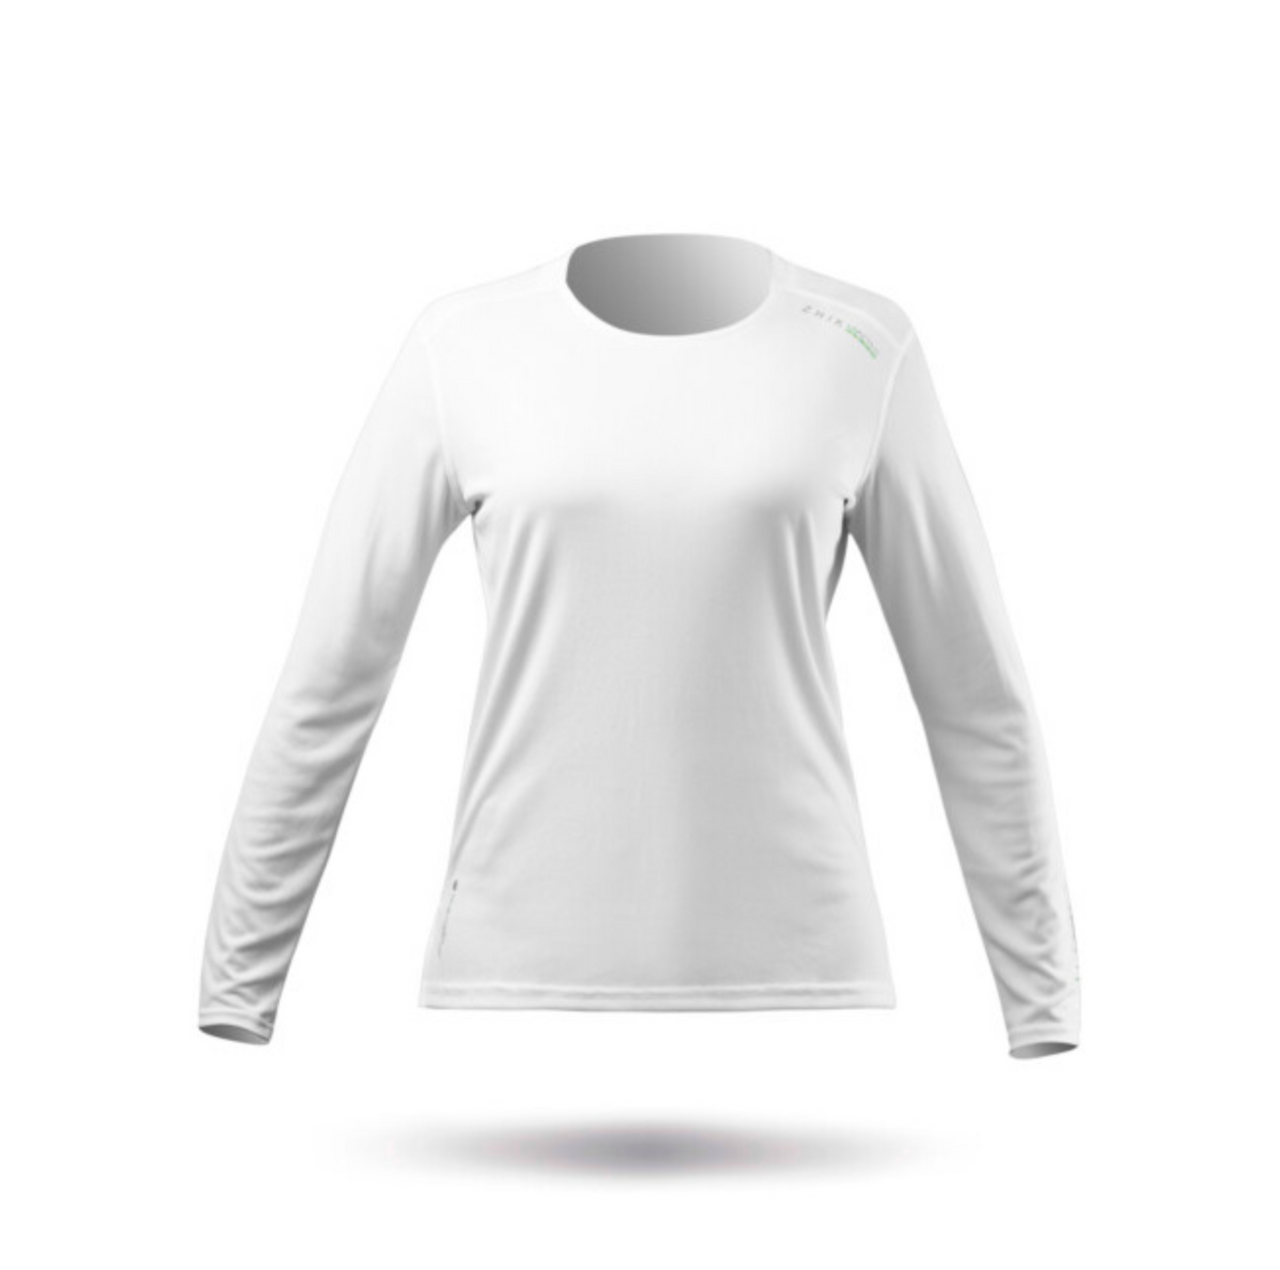 25 Best Long-Sleeved T-shirts for Women 2021